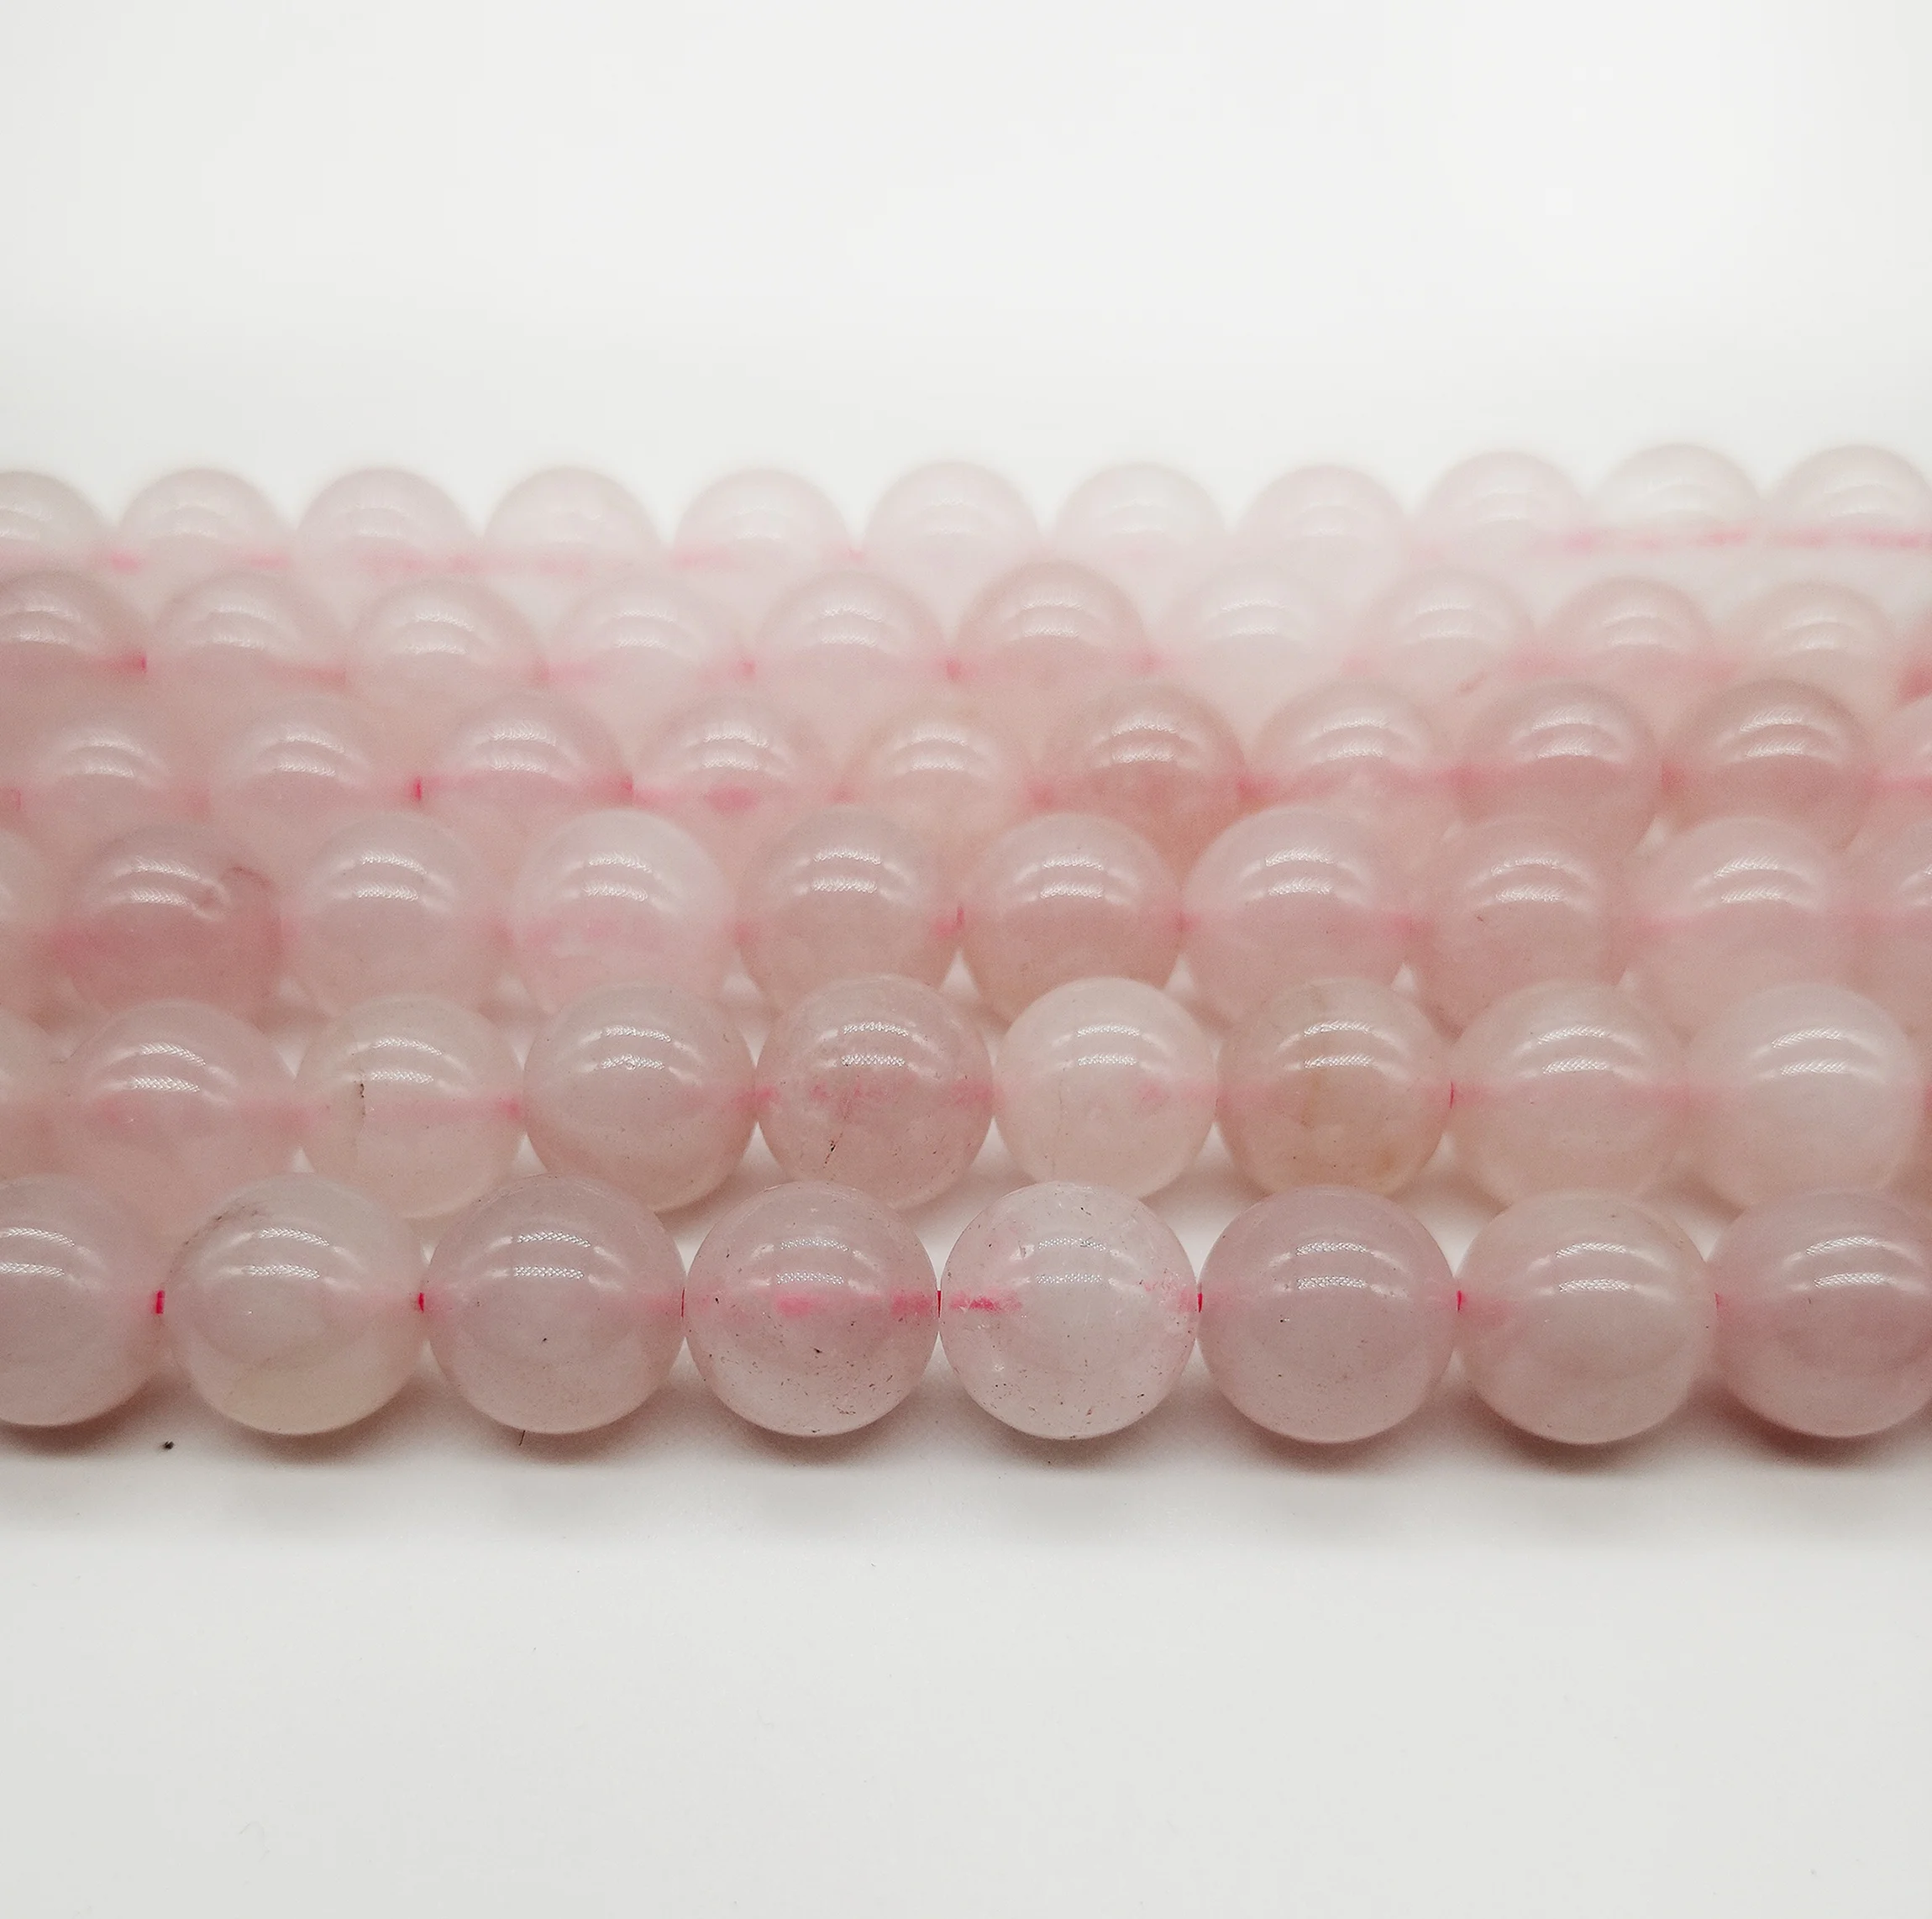 

Wholesale and retail natural rose quartz gemstone healing round loose beads 6mm 8mm 10mm 12mm, As picture